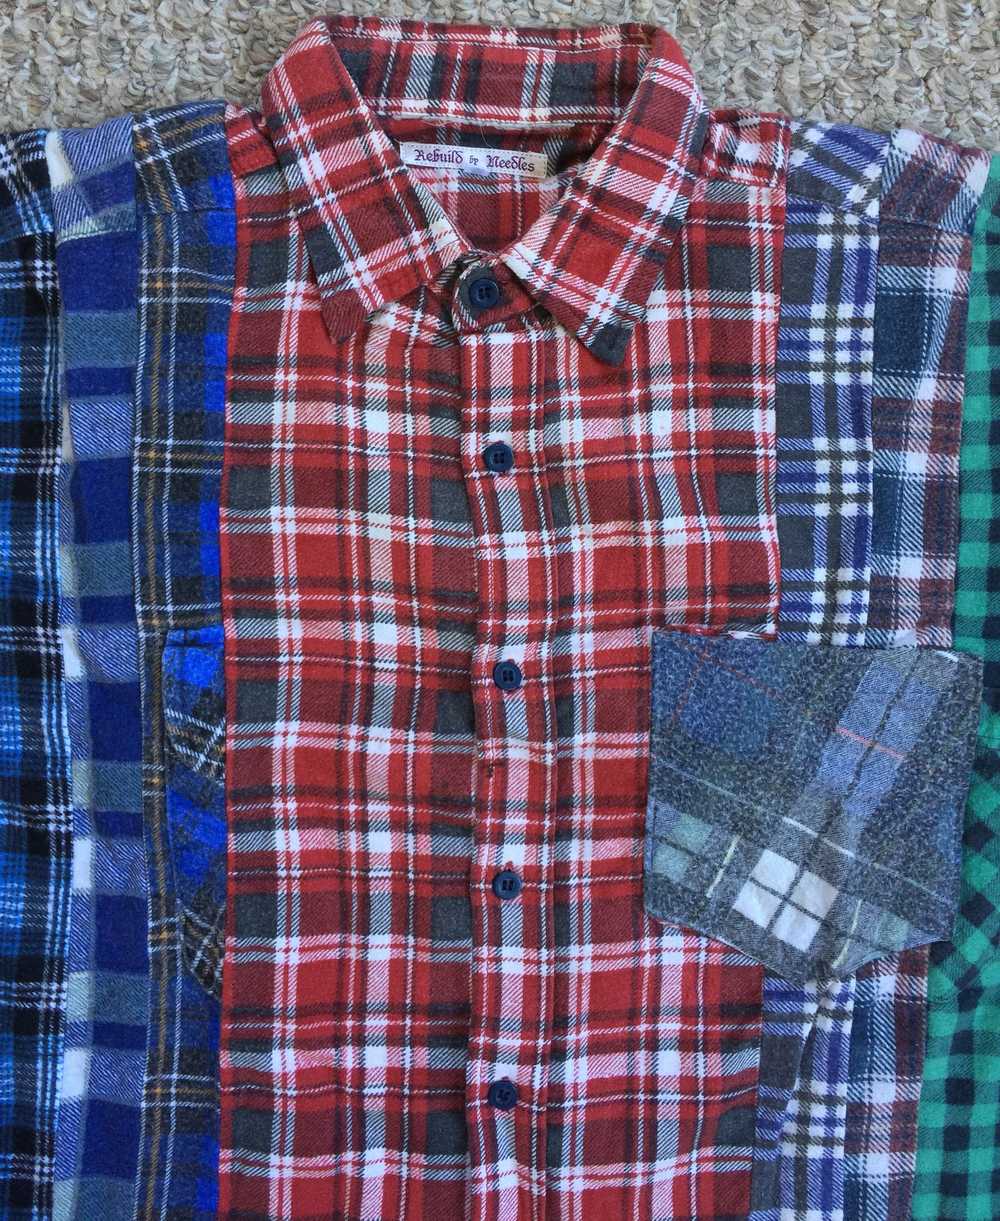 Needles Rebuild by Needles 7 Cut Flannel - image 2